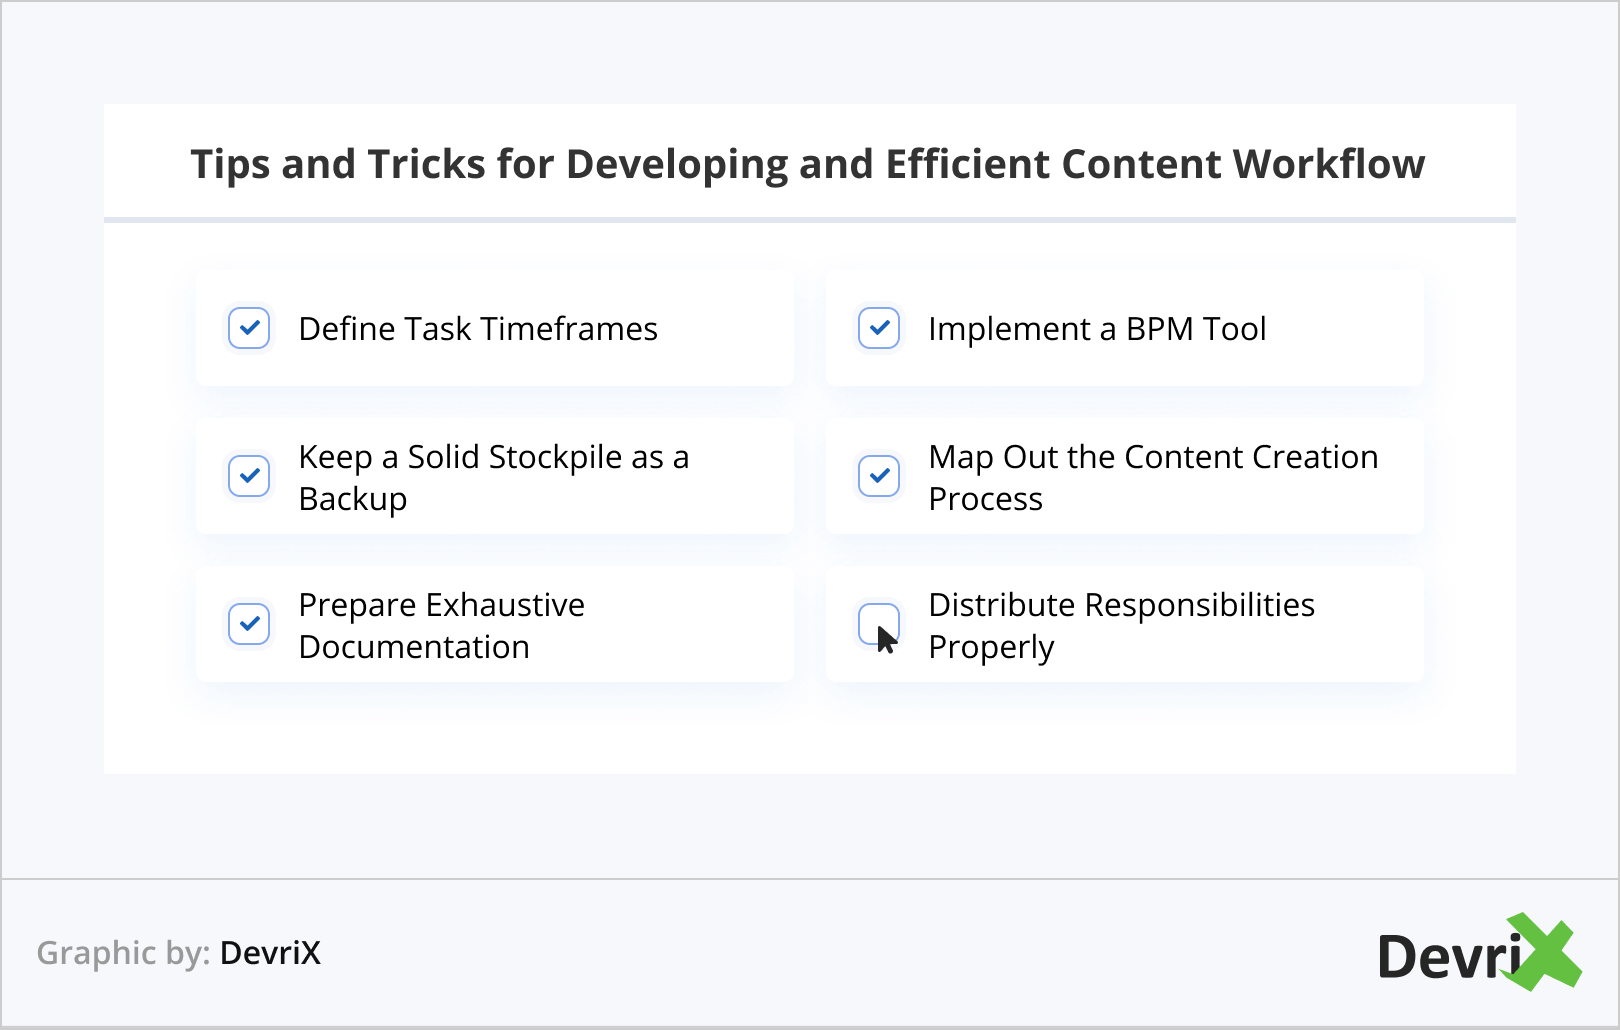 Tips and Tricks for Developing and Efficient Content Workflow